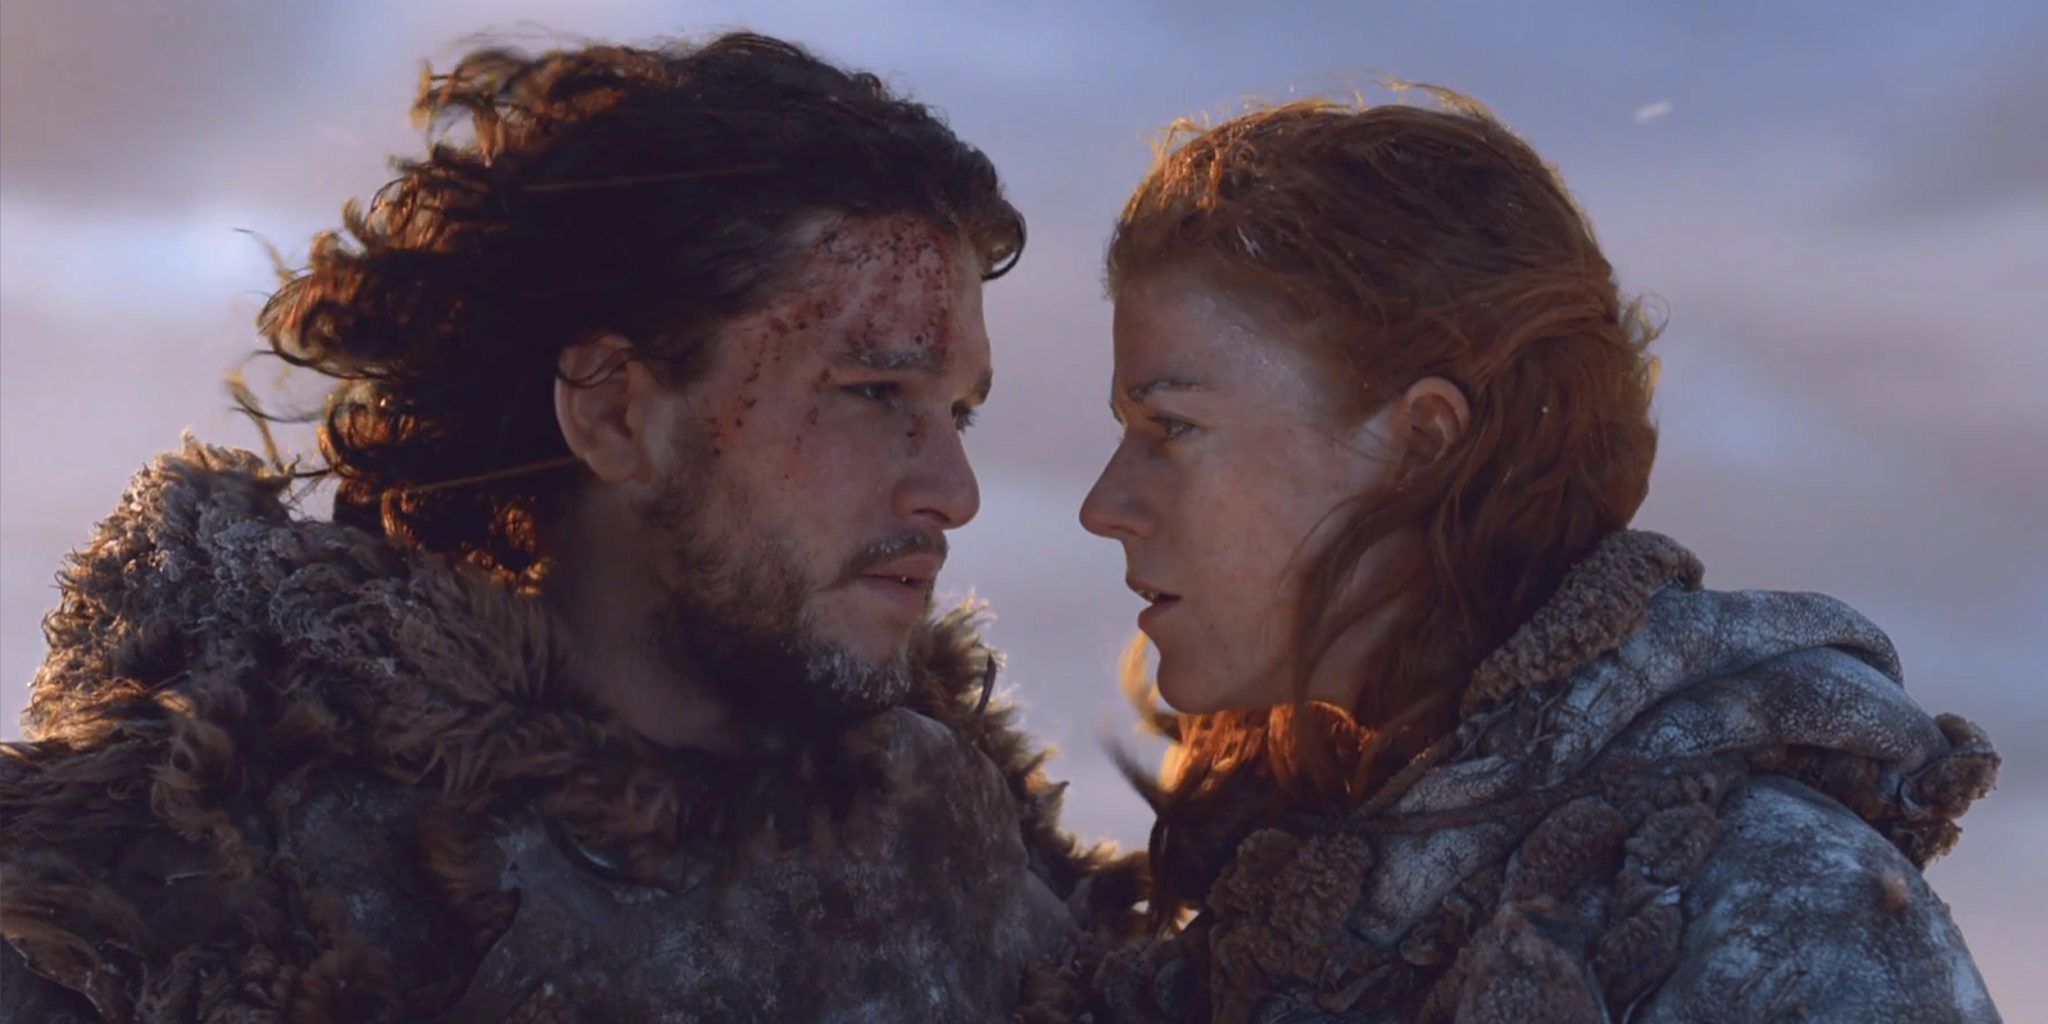 Game of Thrones - Kit Harington and Rose Leslie